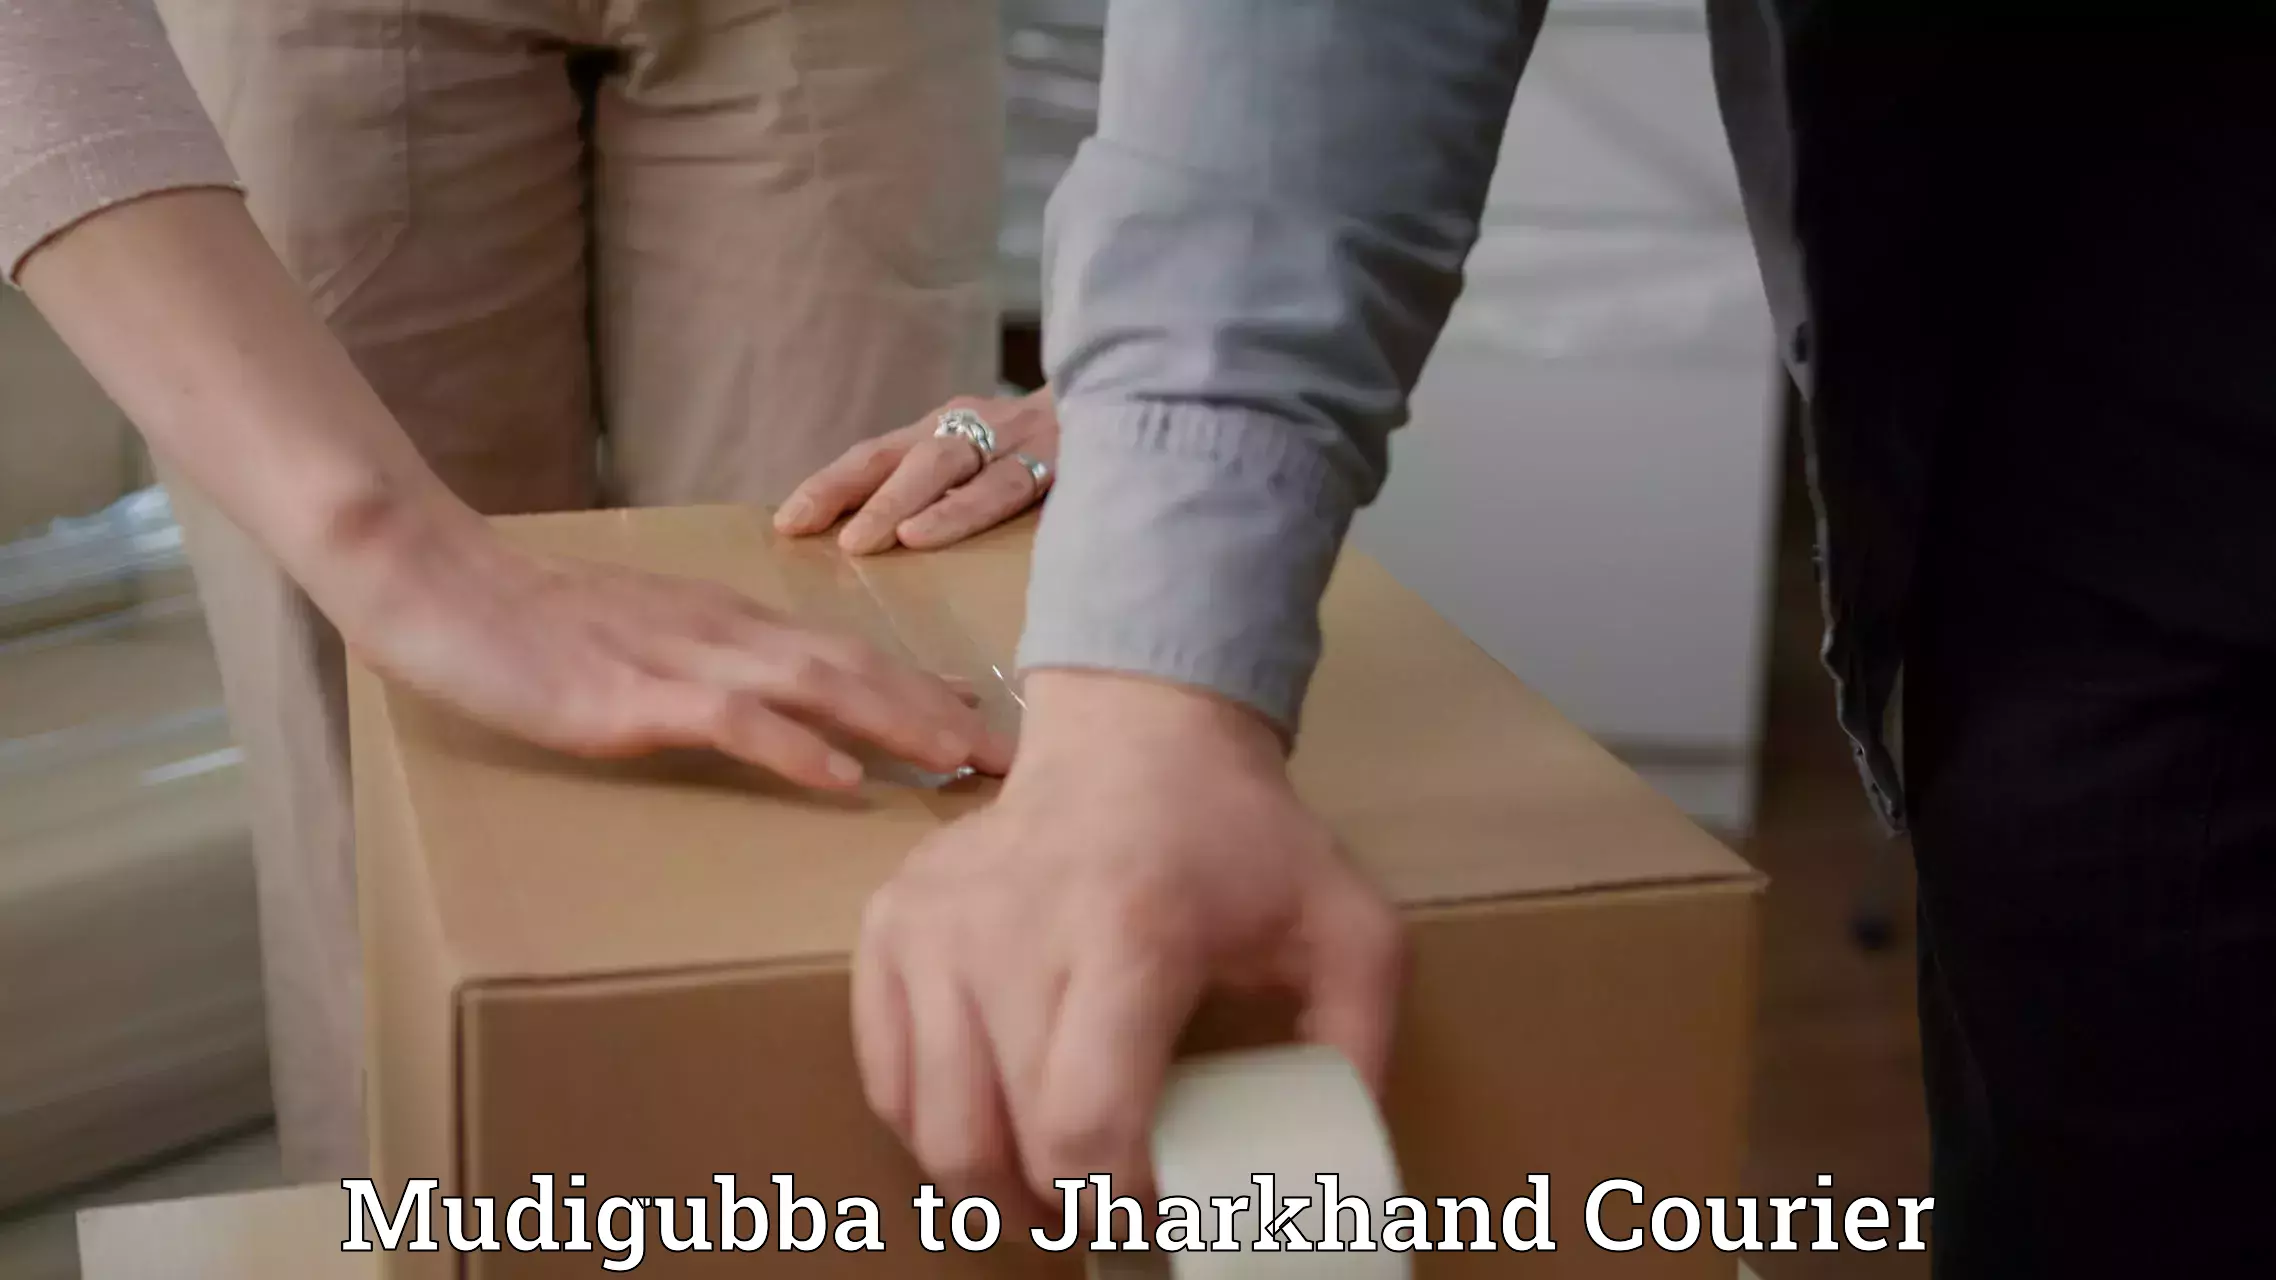 Courier service partnerships Mudigubba to Jharkhand